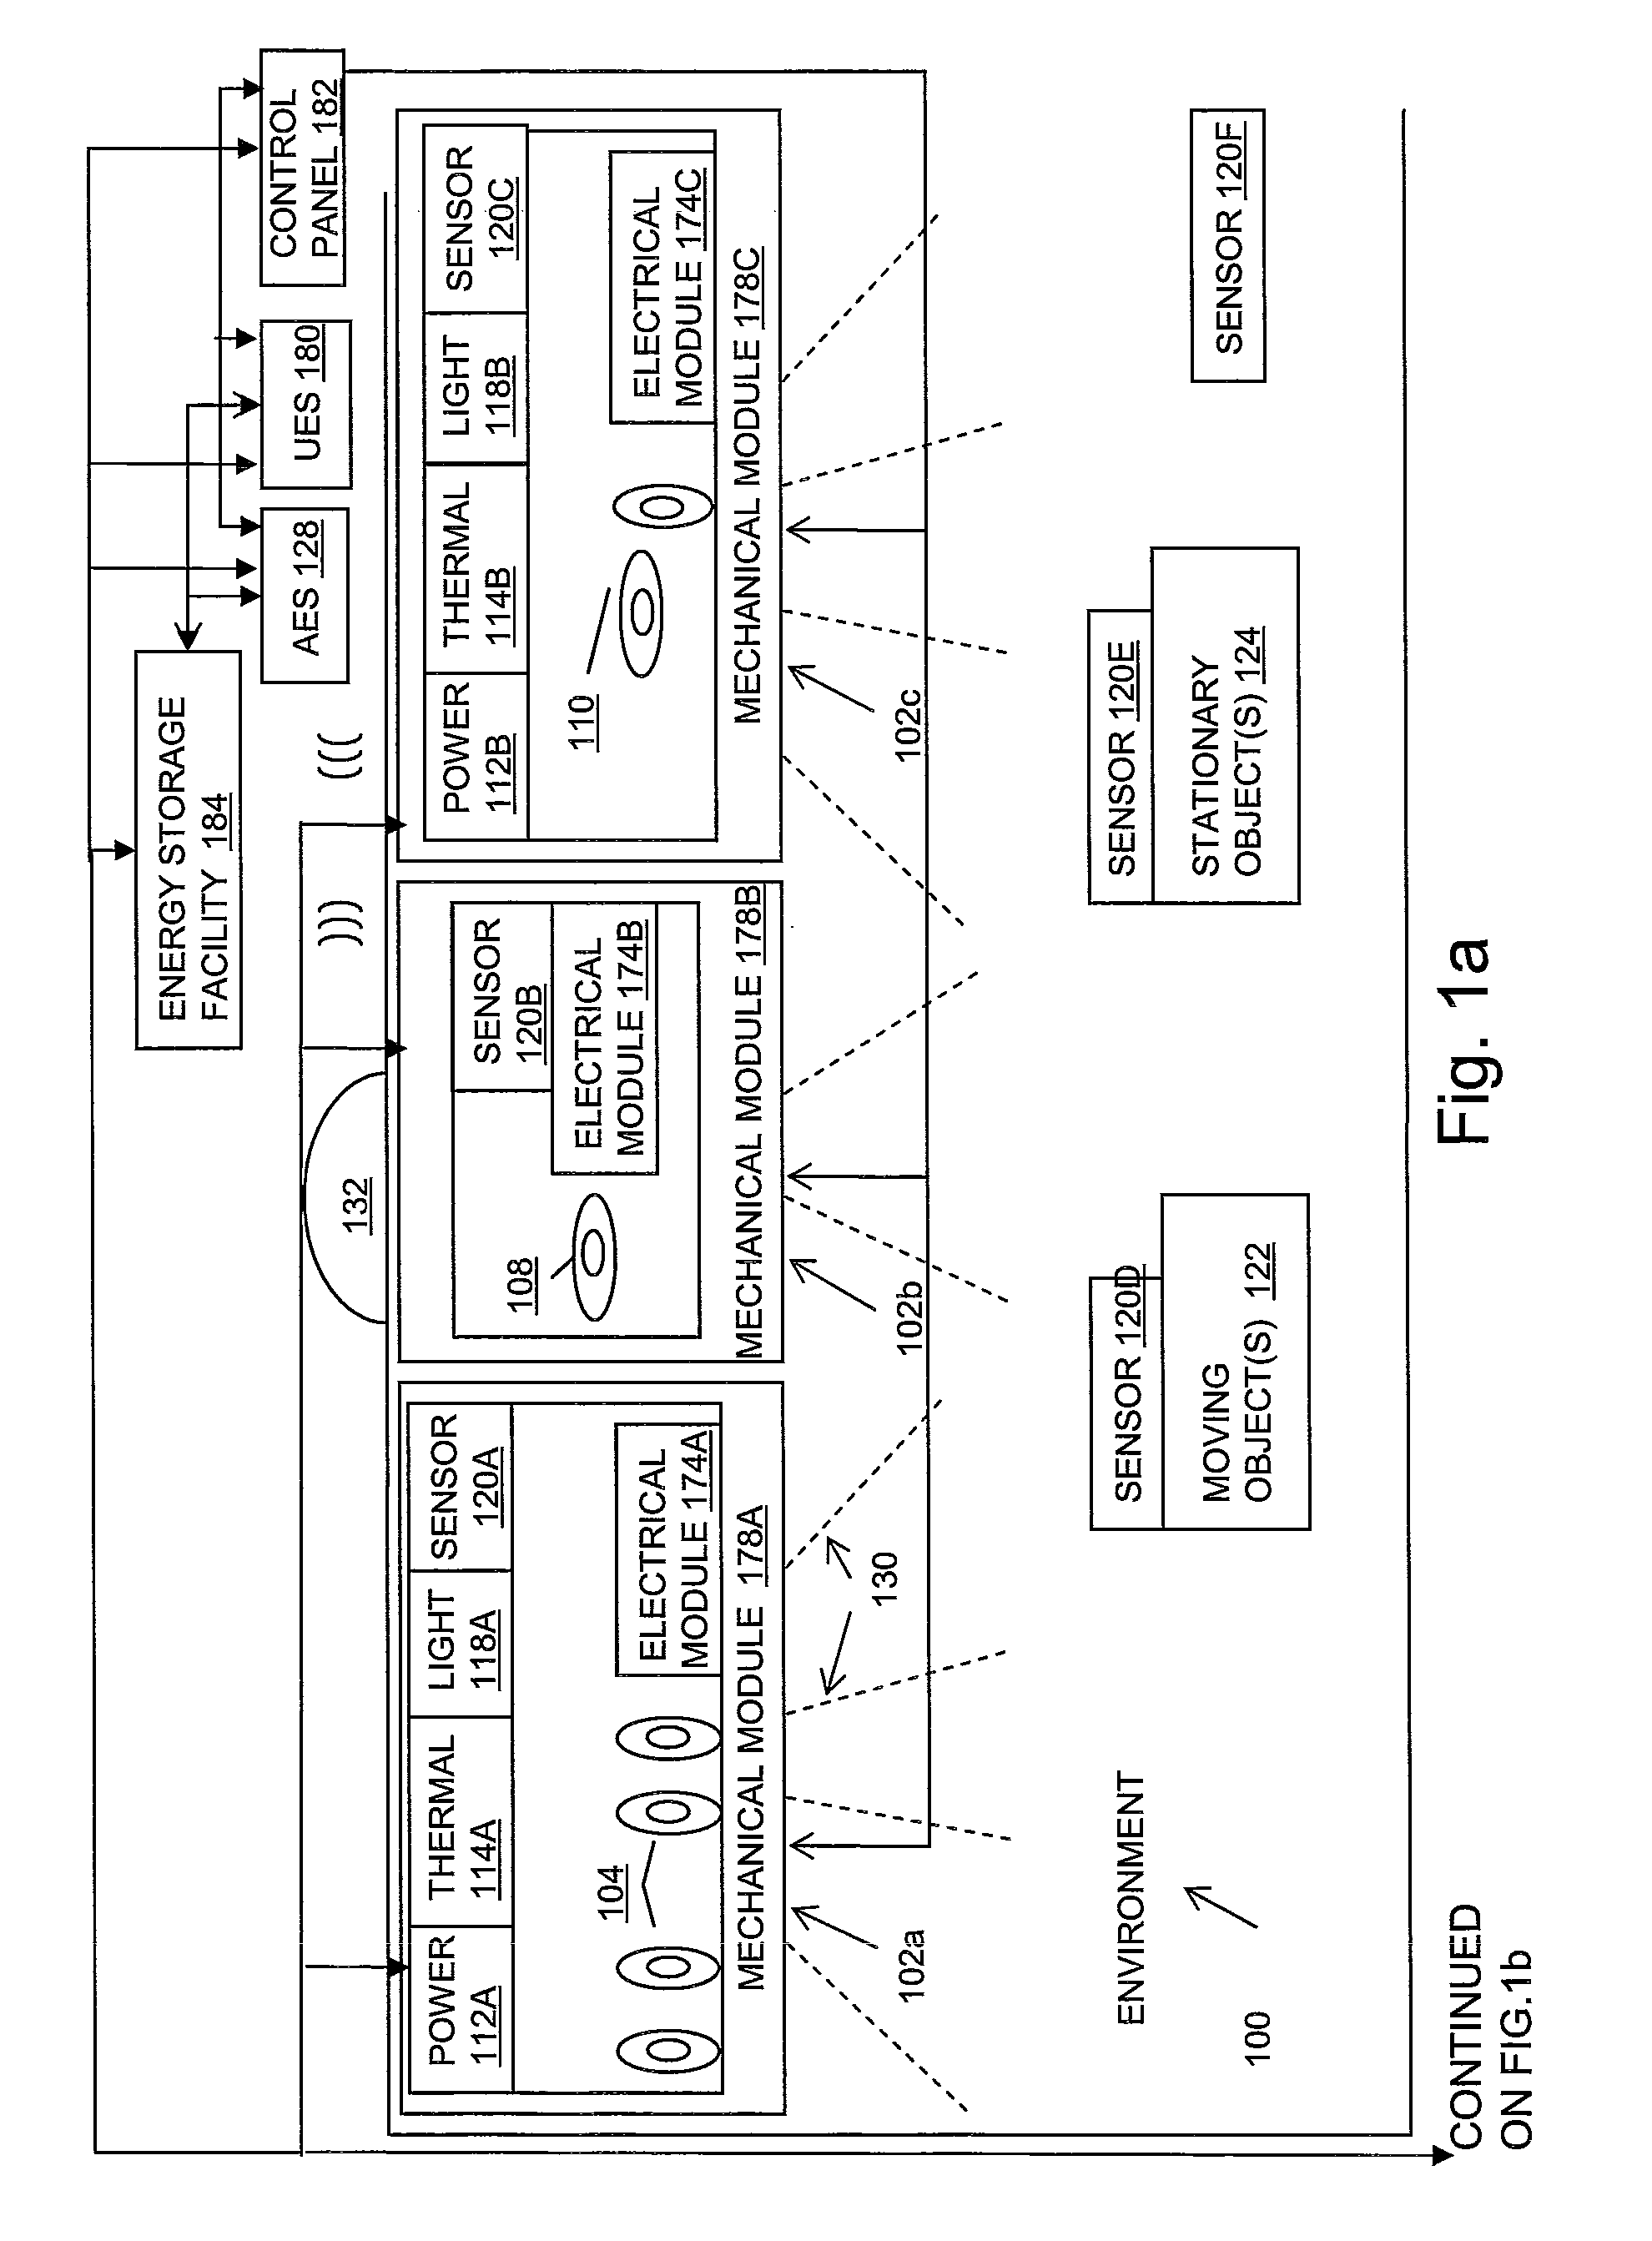 LED-based lighting methods, apparatus, and systems employing LED light bars, occupancy sensing, local state machine, and meter circuit